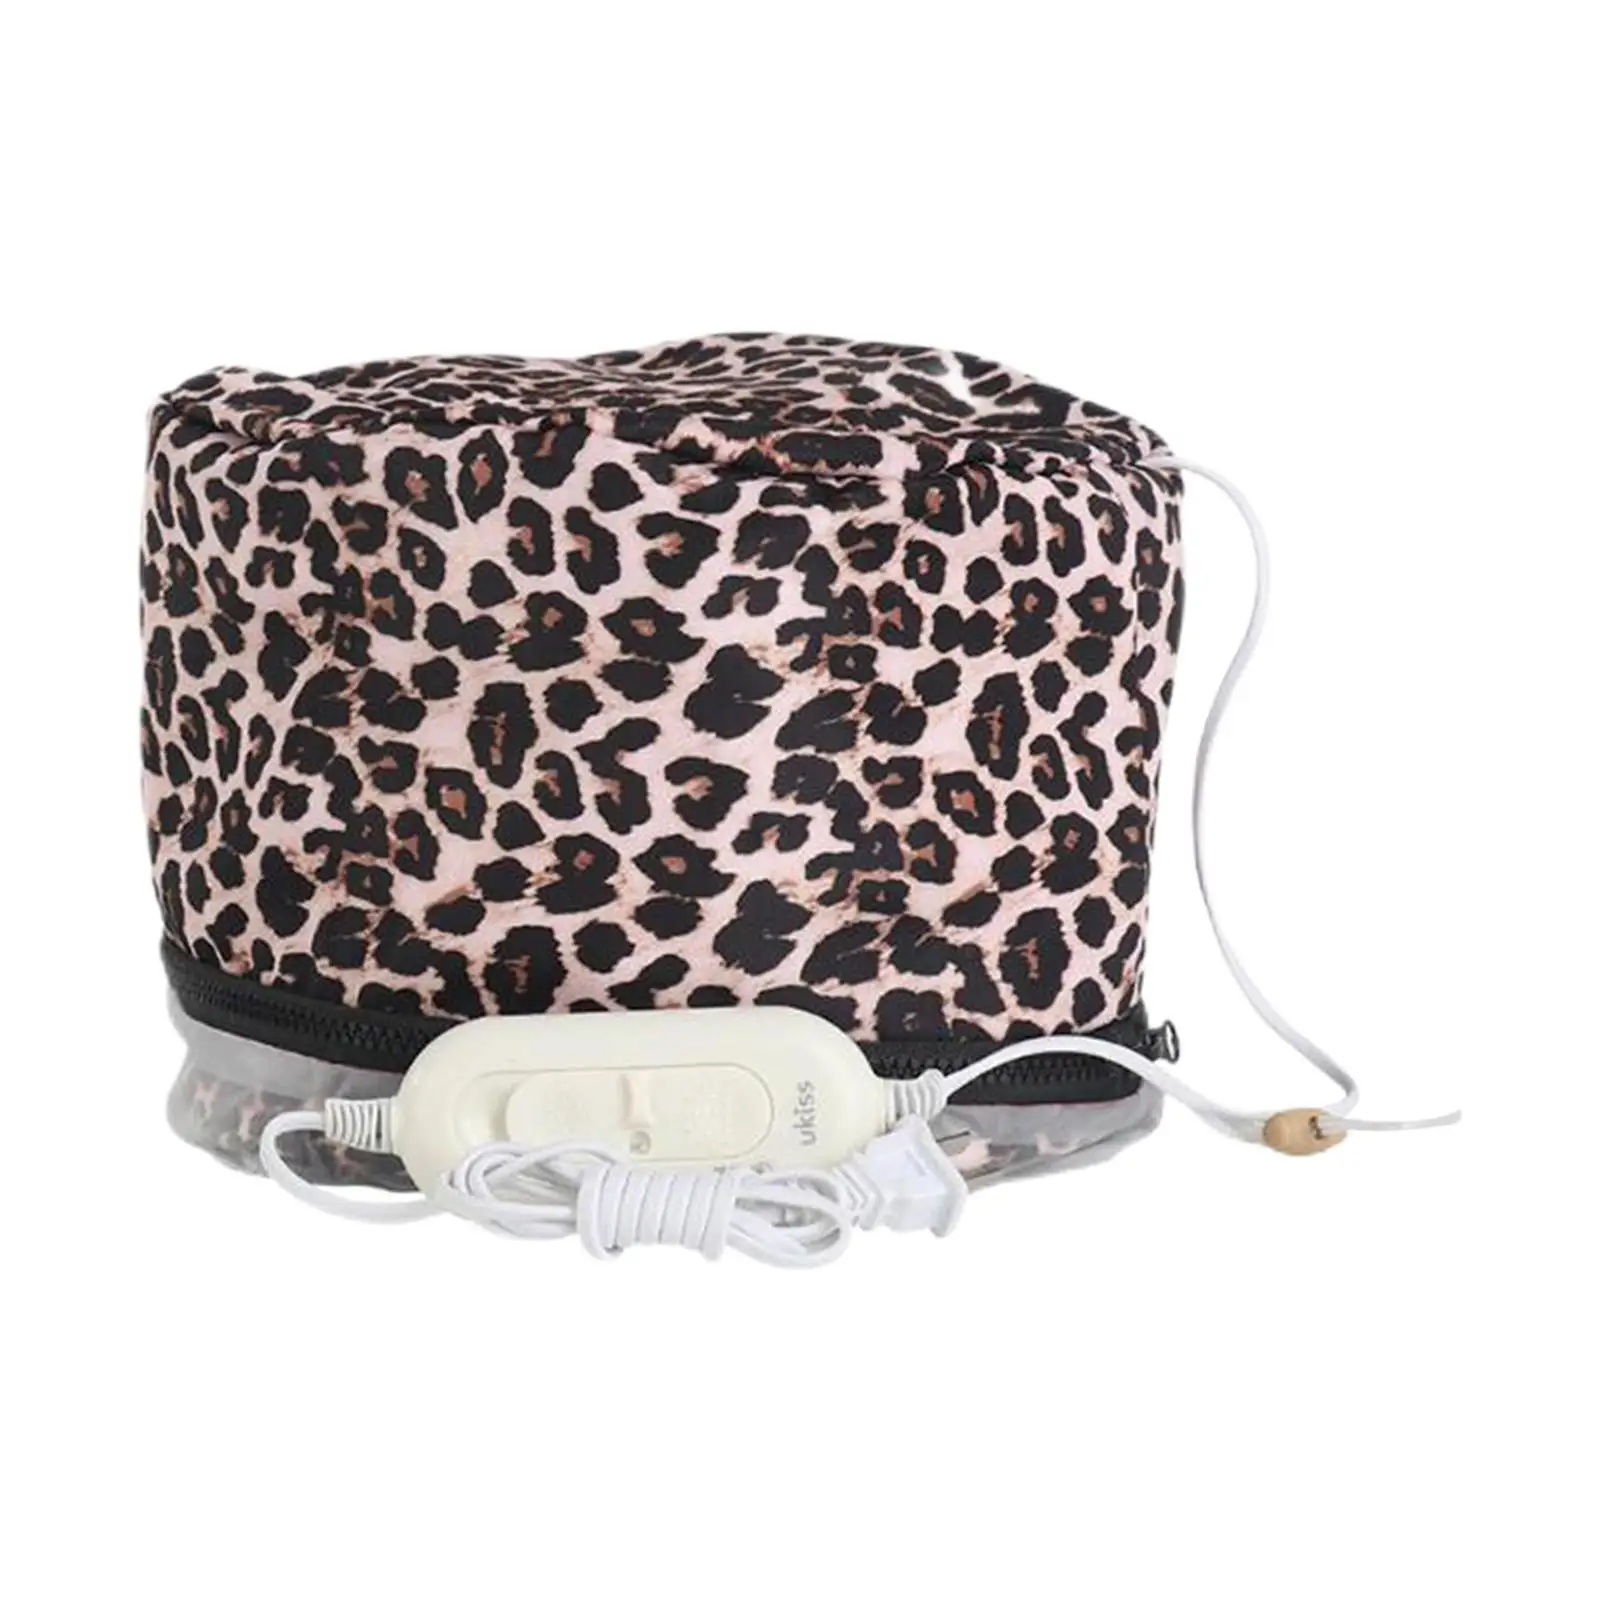 Hair Steamer Heating Hat 110V Hair SPA Waterproof Thermal Caps Personal Care Adjustable Temperature Control Leopard Print US images - 6